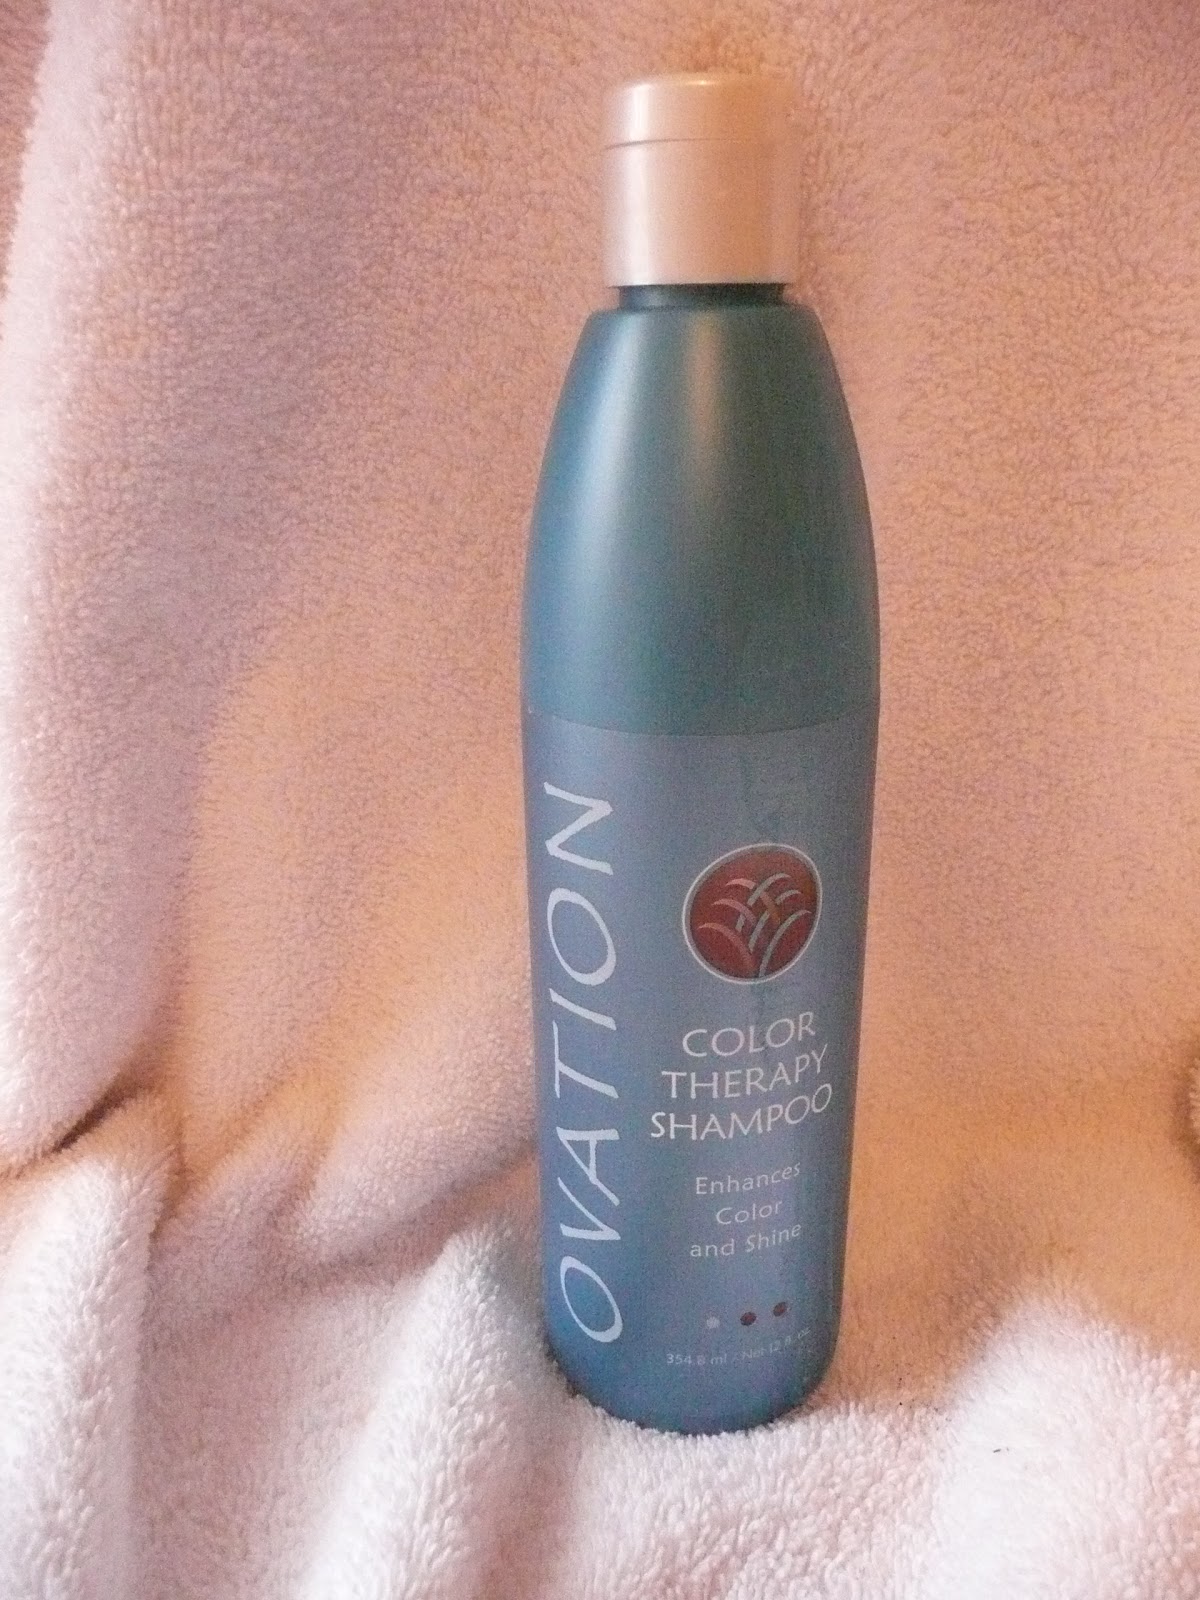 Ovation Hair Therapy Hair News Network: Perfect For Beauty Schools and 